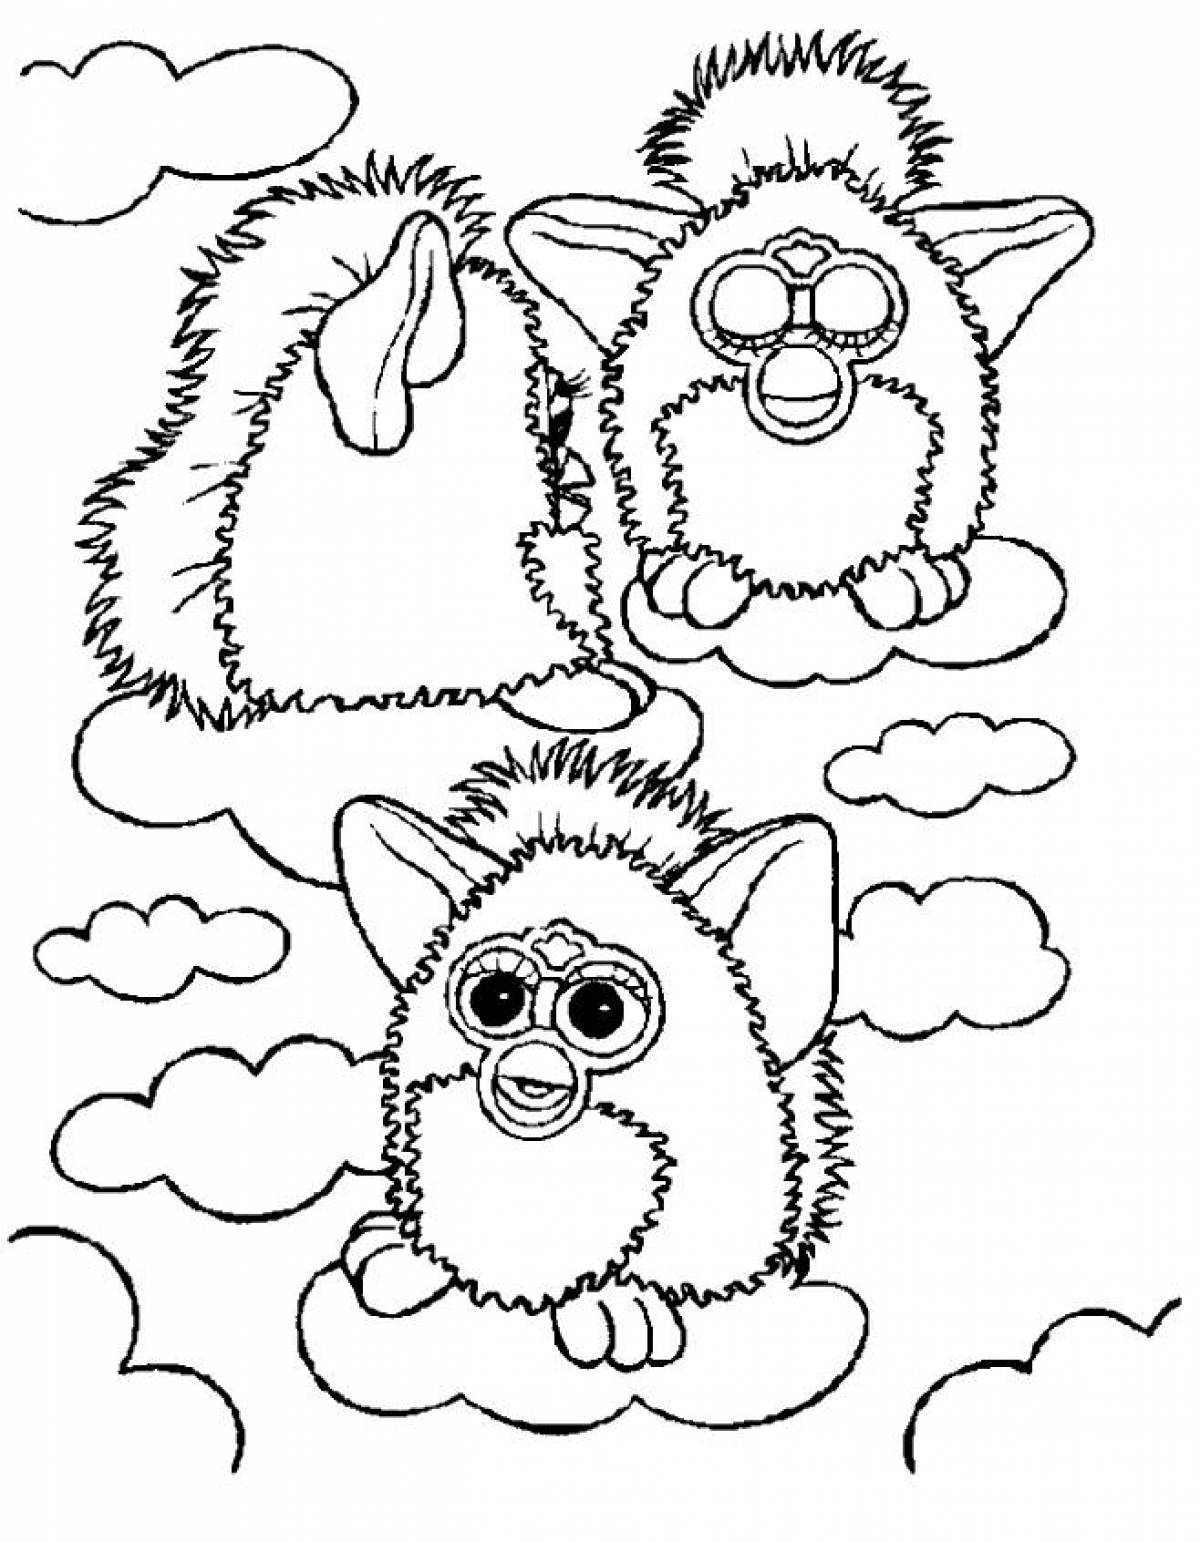 Coloring Furby in the clouds